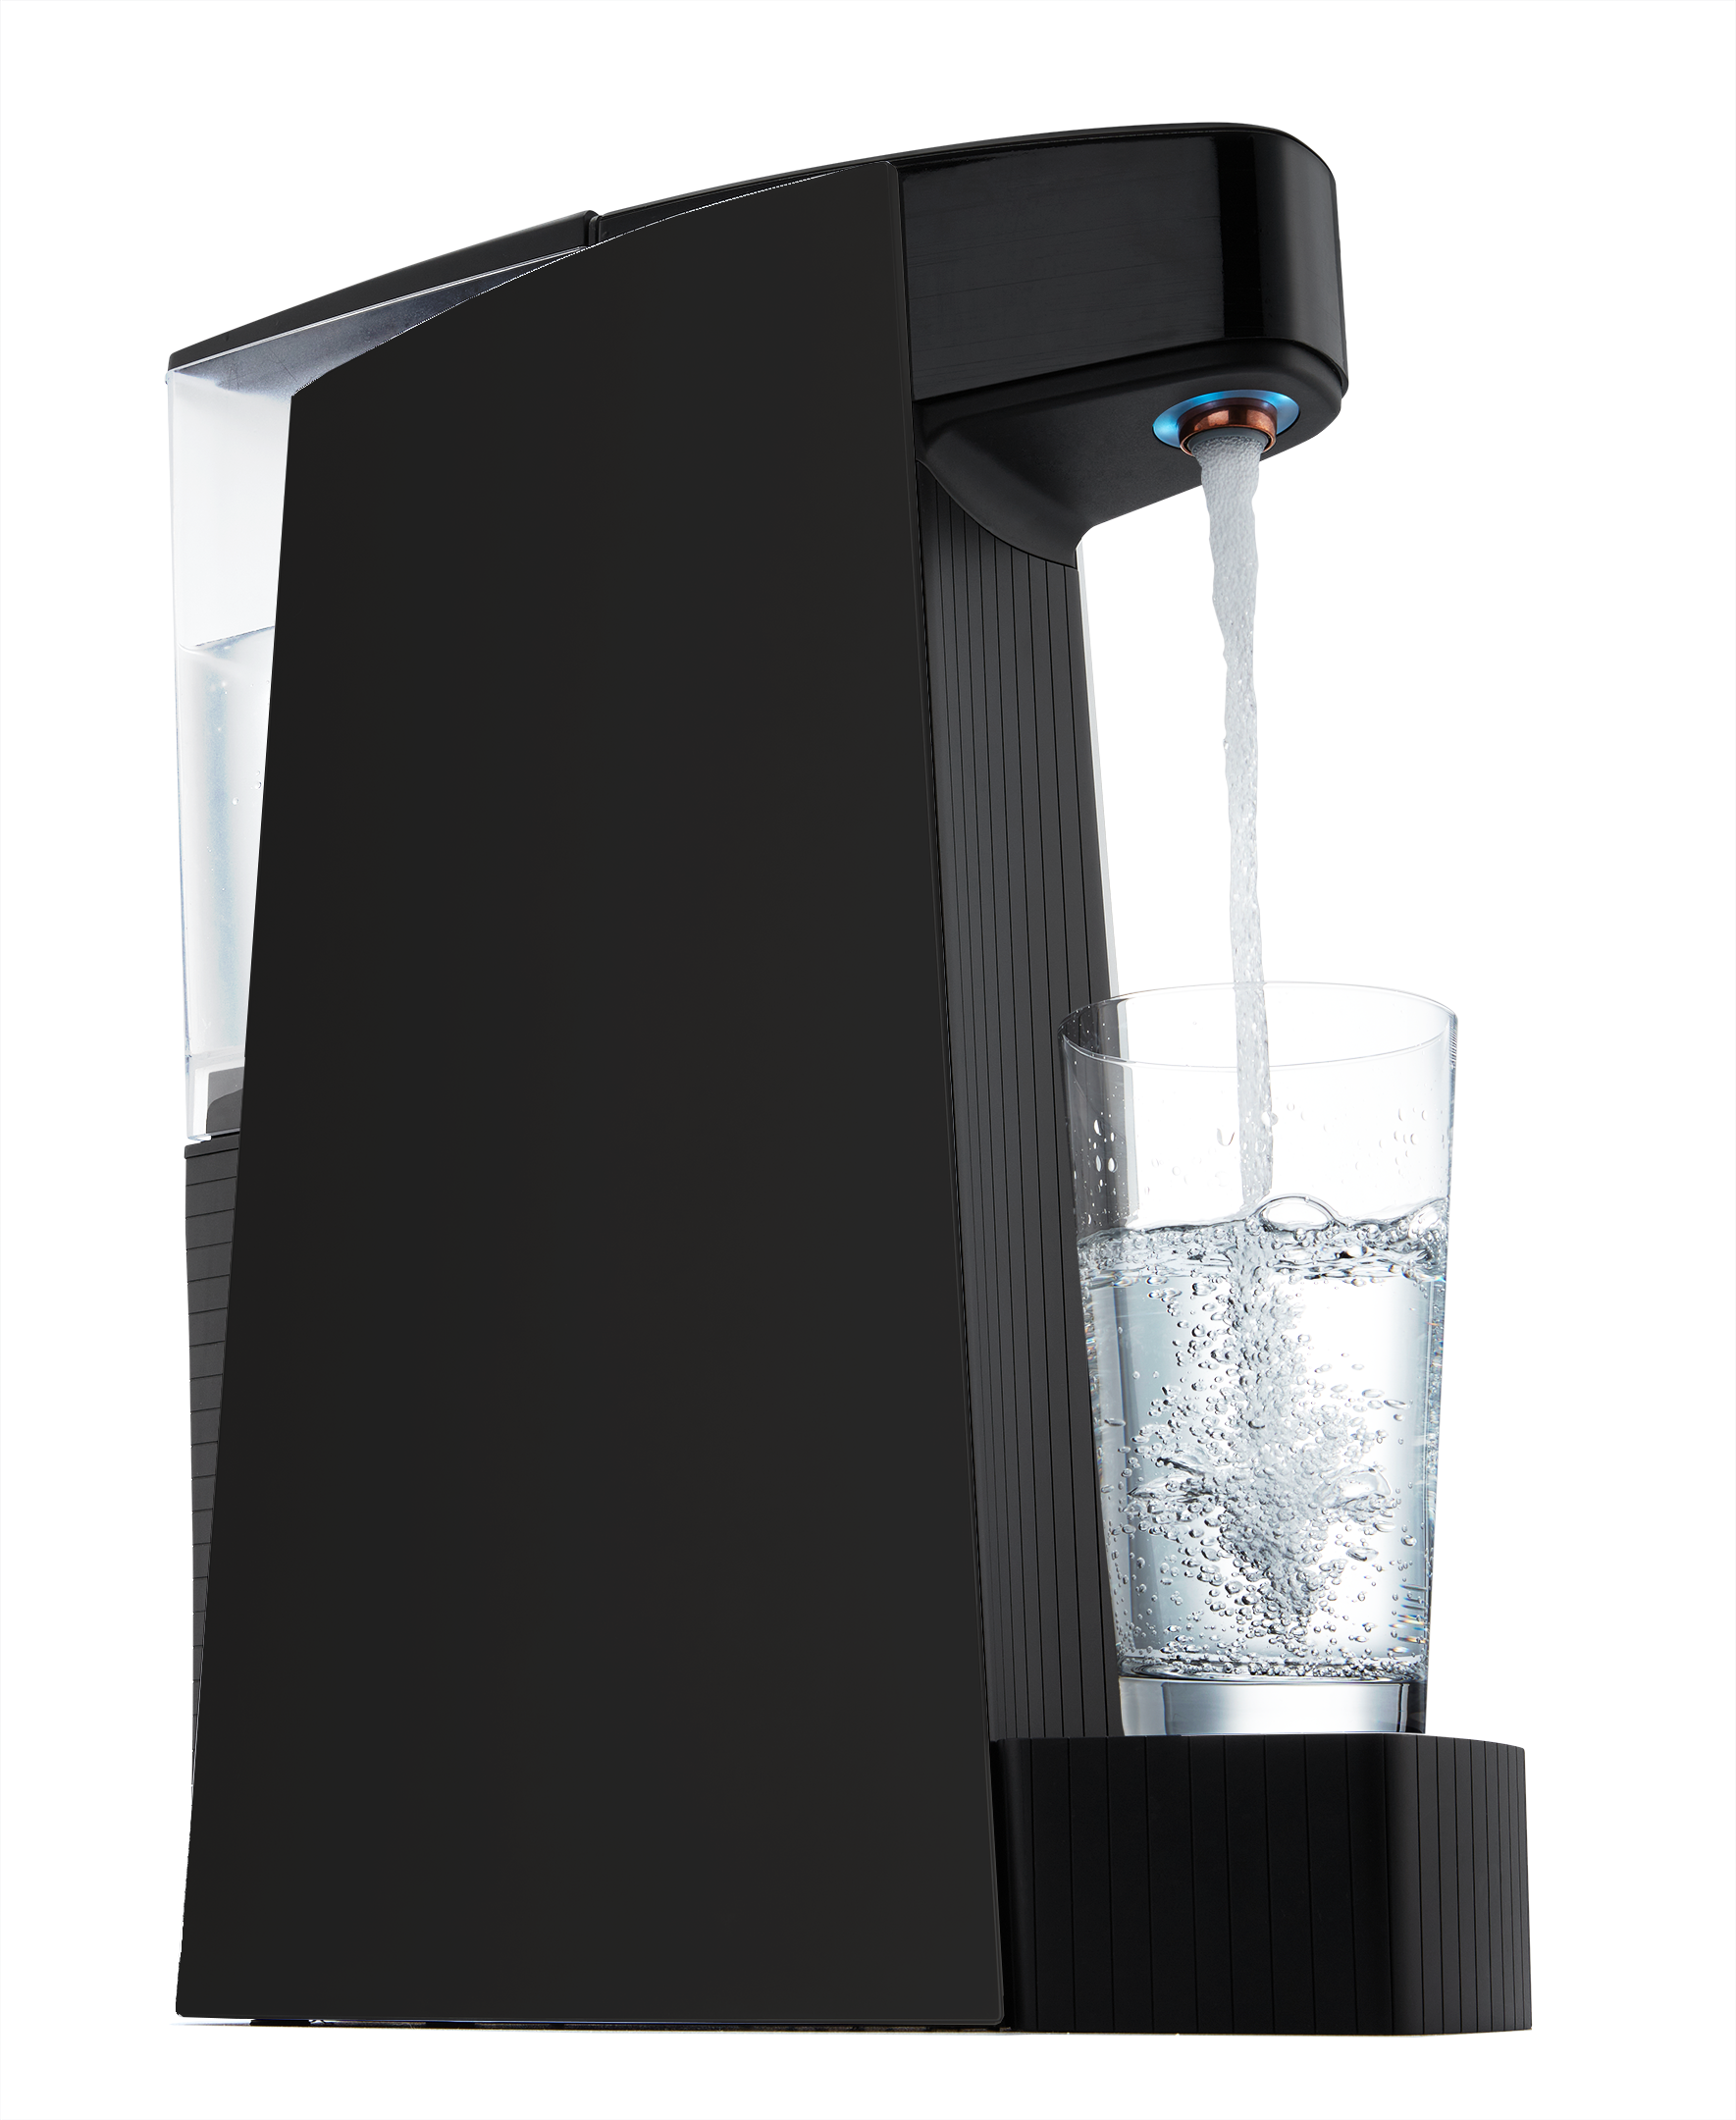 Carbon8 Kit - One Touch Sparking Water Maker and Dispenser + Co2 Cylinder - Black